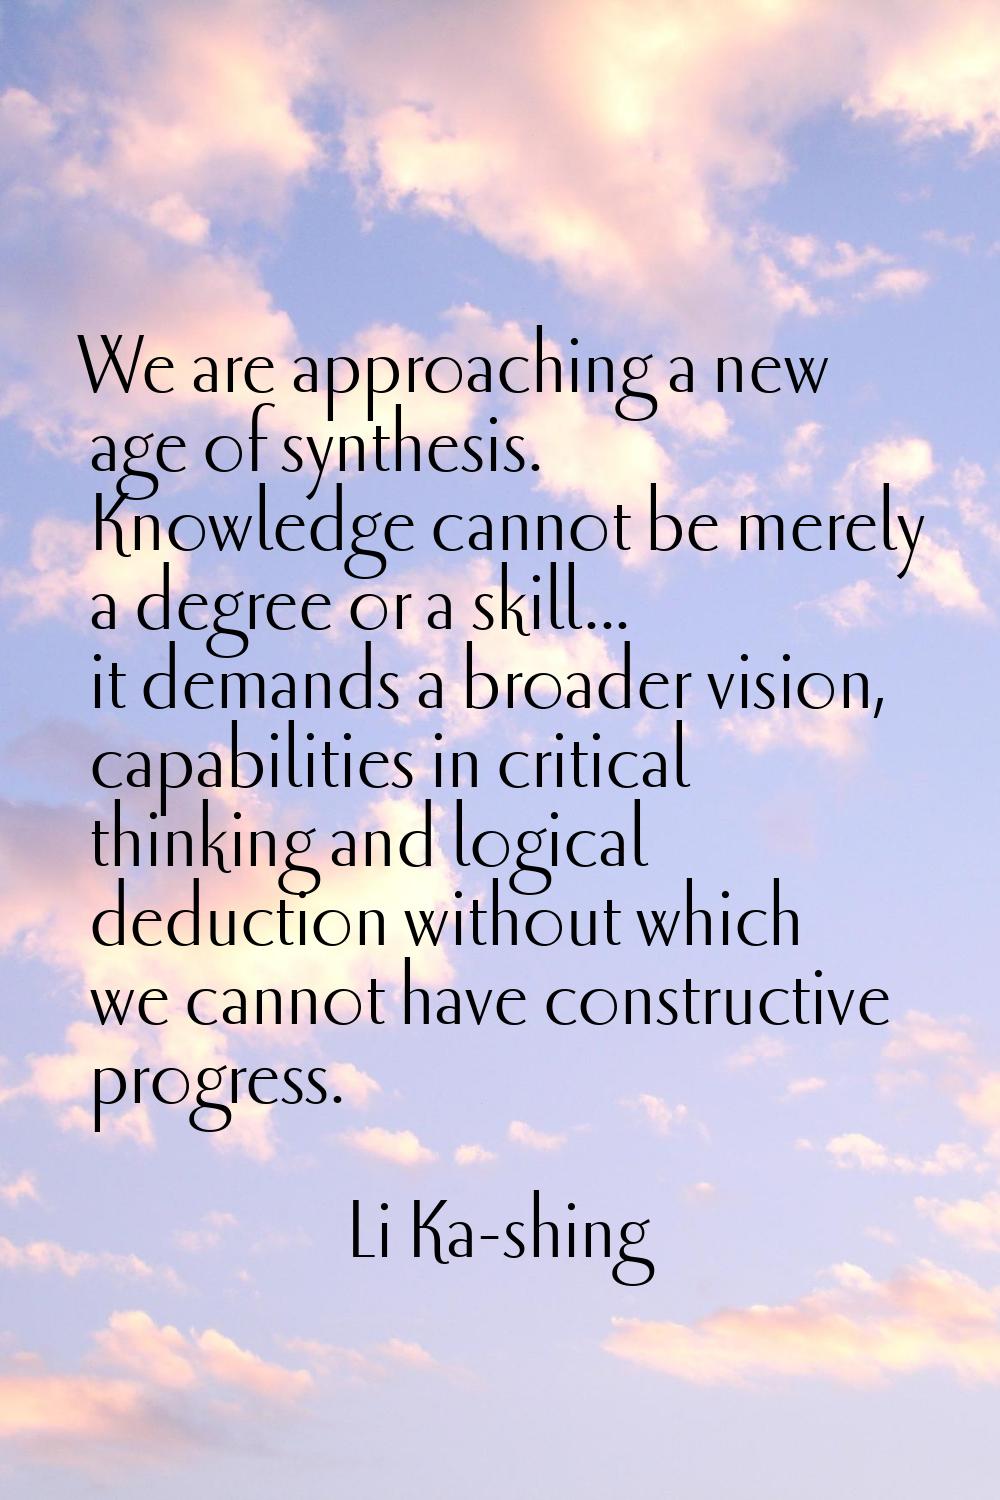 We are approaching a new age of synthesis. Knowledge cannot be merely a degree or a skill... it dem